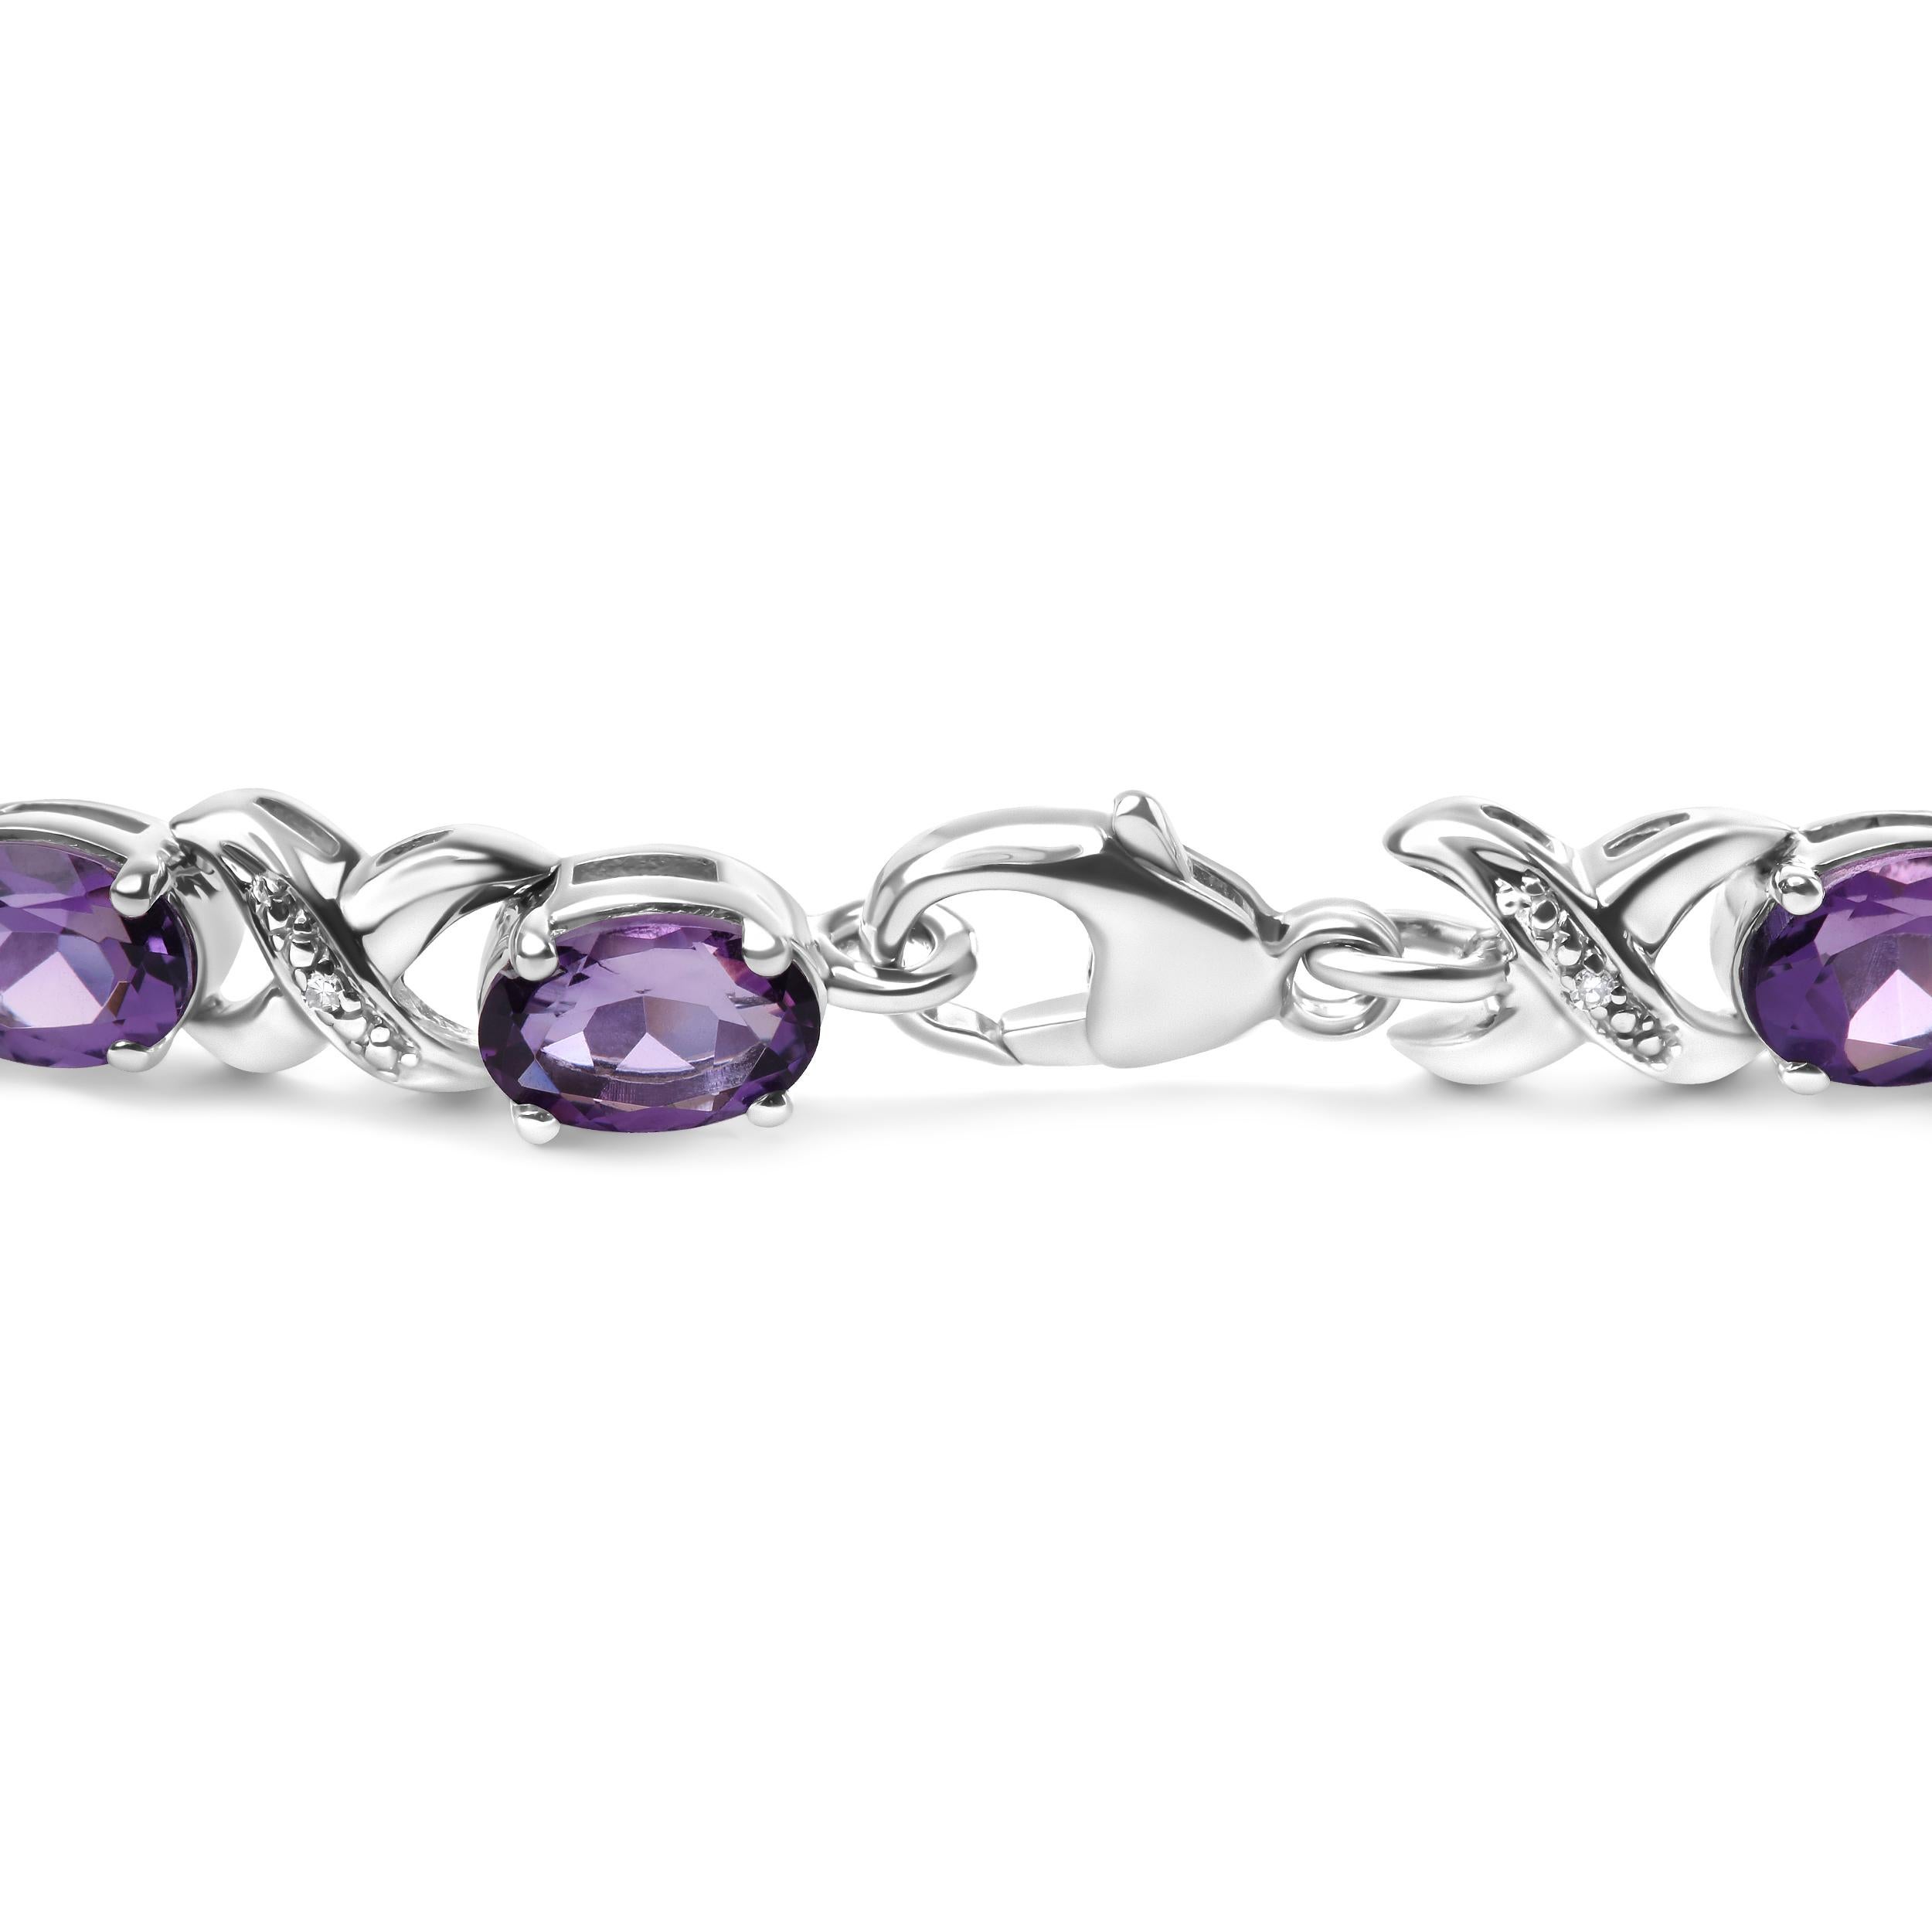 Indulge in the regal splendor of this exquisite .925 sterling silver tennis link bracelet, featuring 15 natural heat-treated purple amethyst gemstones in the oval shape, each measuring 7 x 5mm. The prong setting of each gemstone ensures maximum